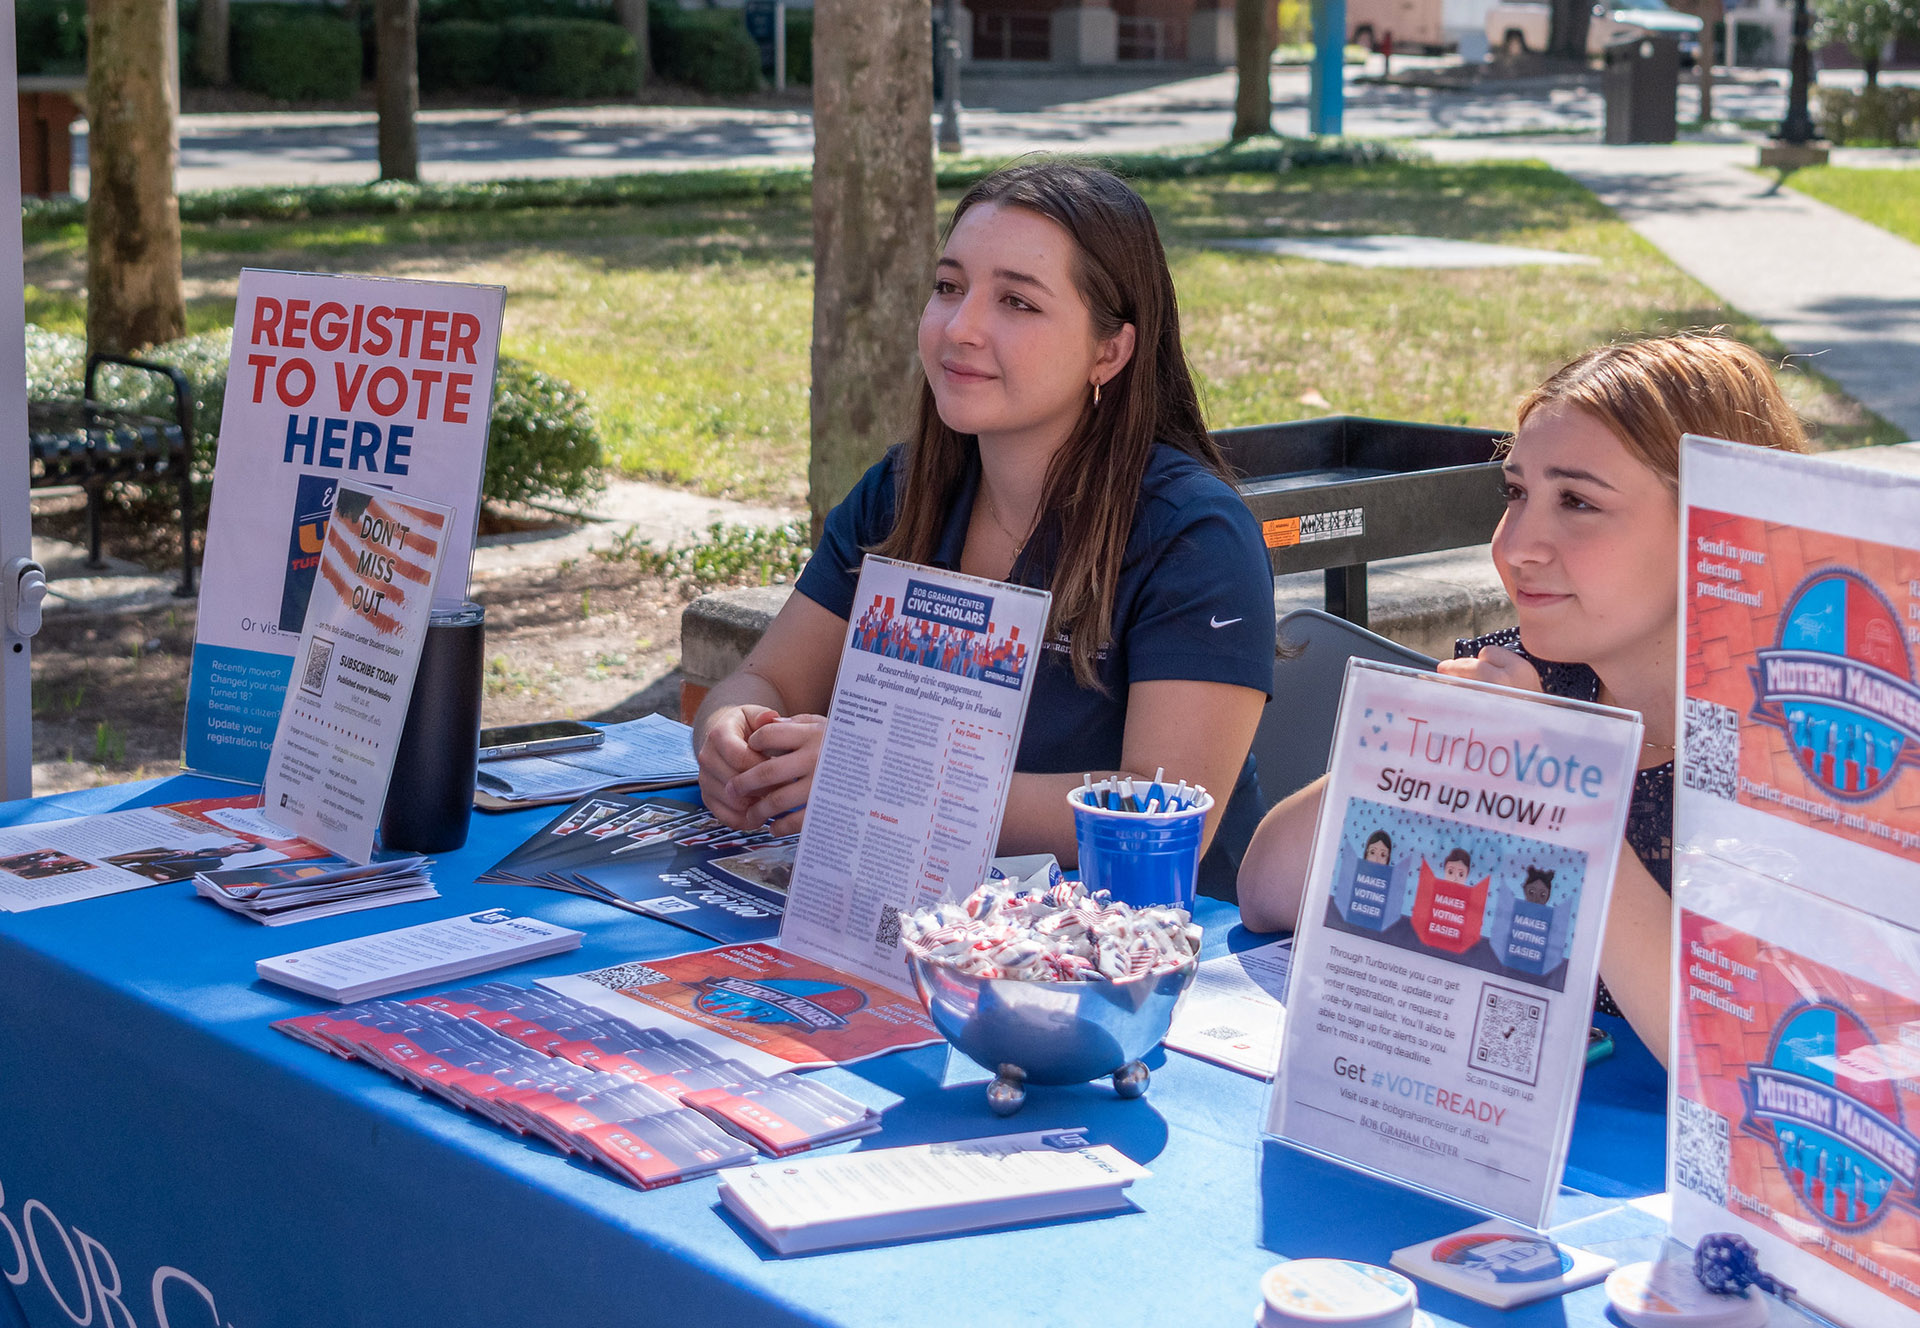 Students register prospective voters on campus